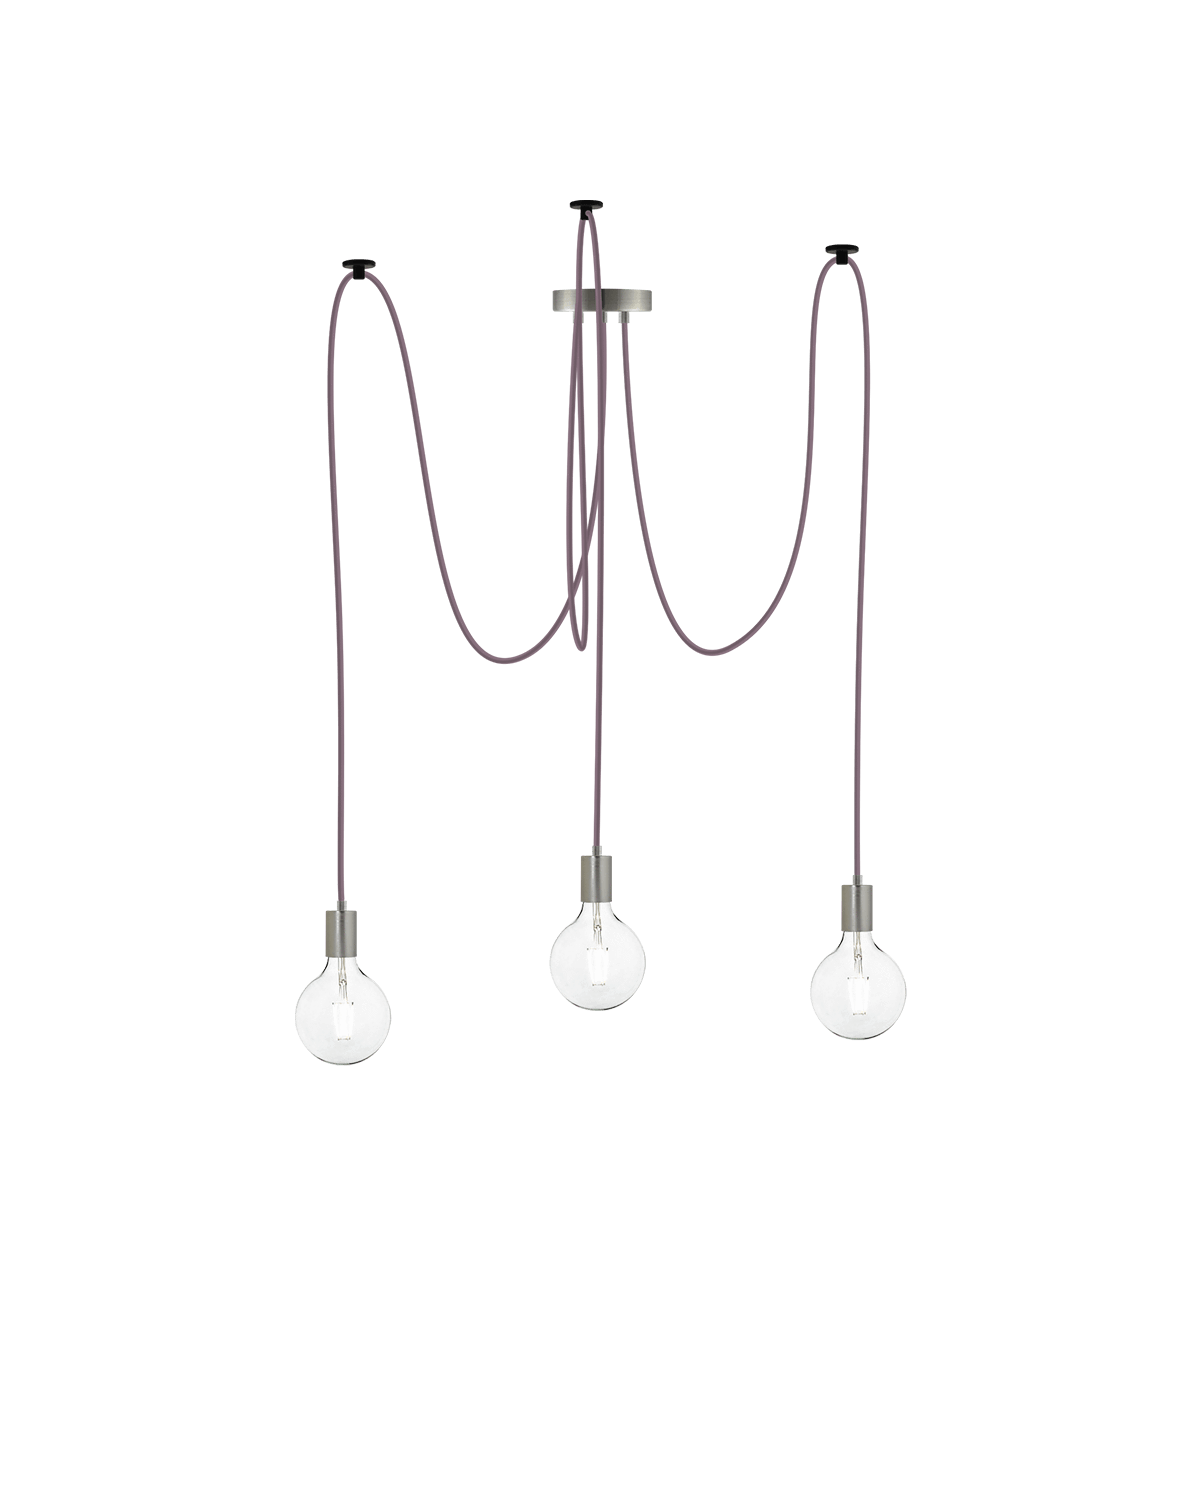 Swag Chandelier: Mauve and Nickel Hangout Lighting 3 Swag